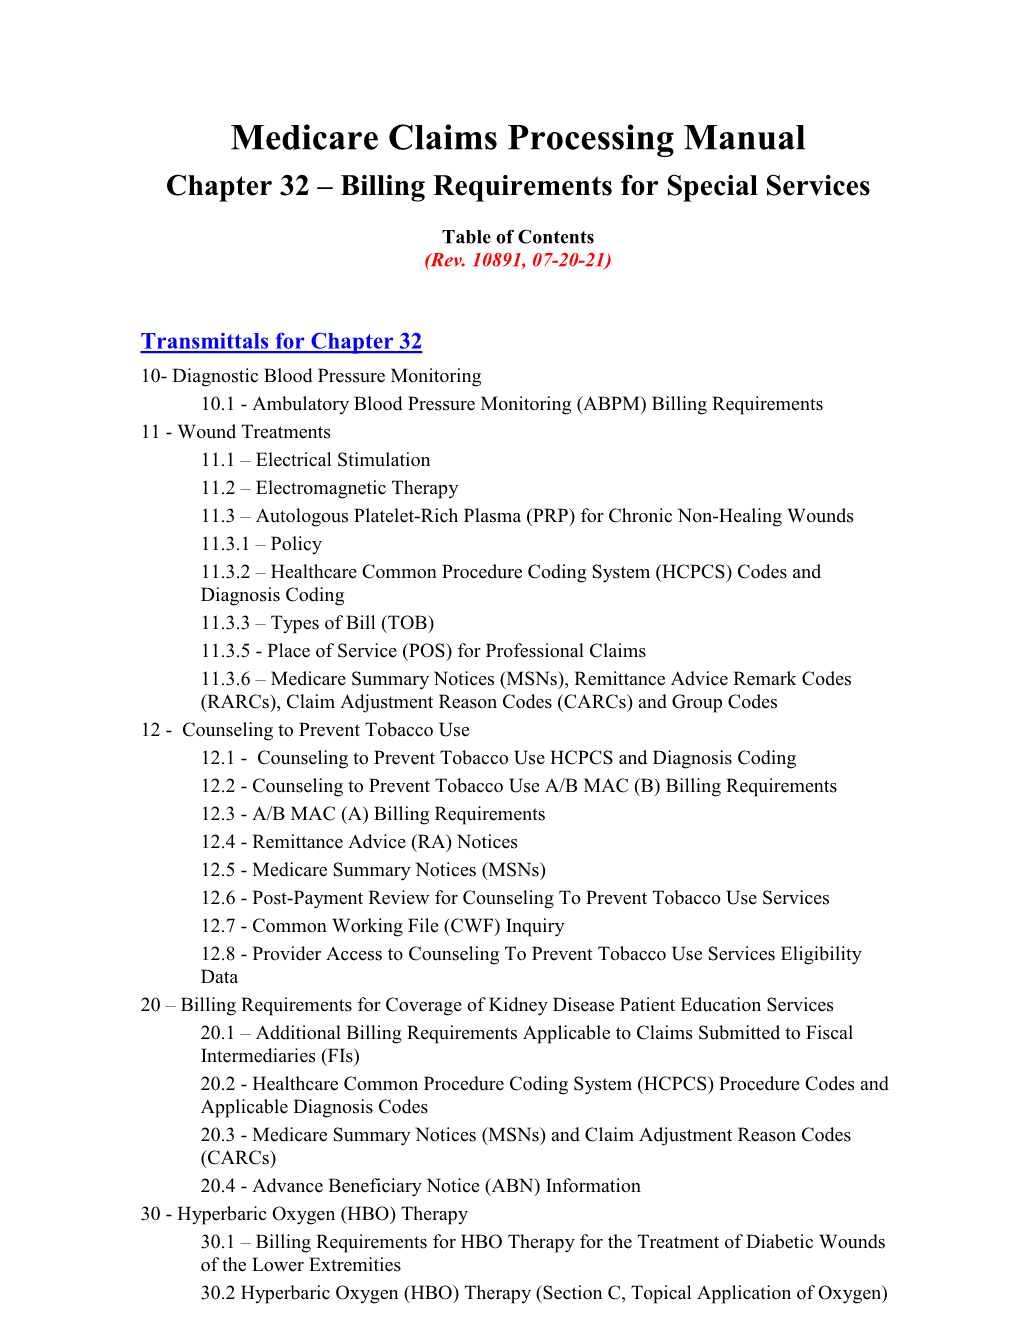 Medicare Claims Processing Manual Chapter 32 – Billing Requirements for Special Services